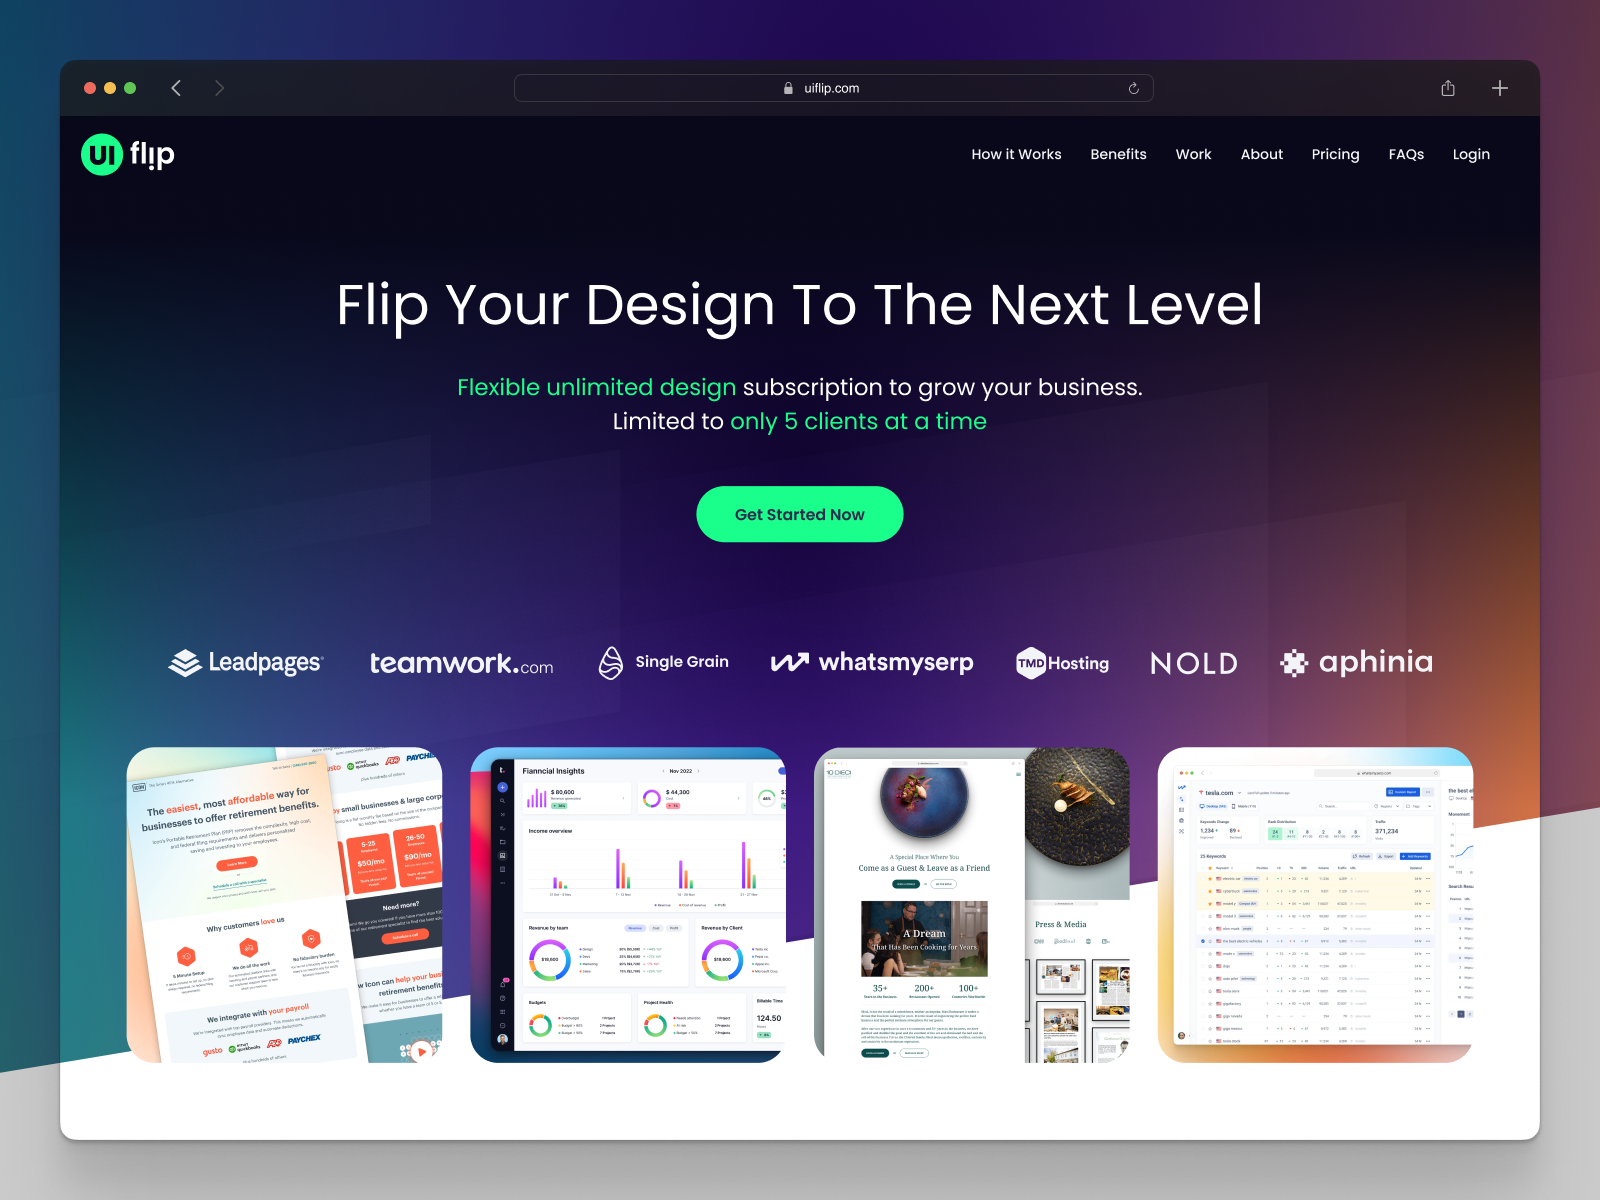 UI Flip - Unlimited Design Subscription Service by Ivo Ivanov on Dribbble